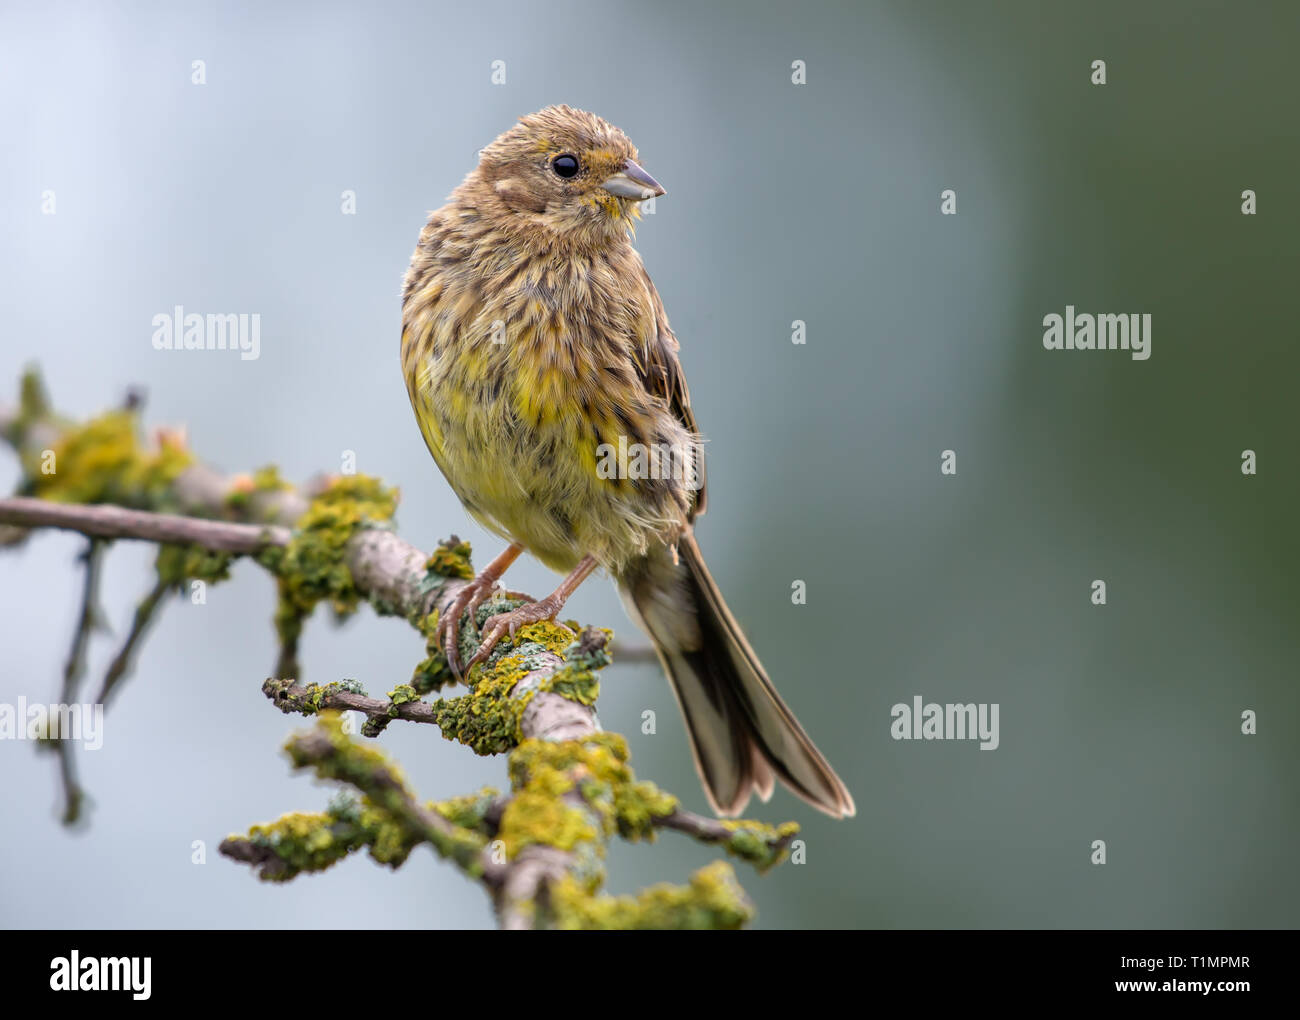 Yellowhammer turning on an aged branch Stock Photo